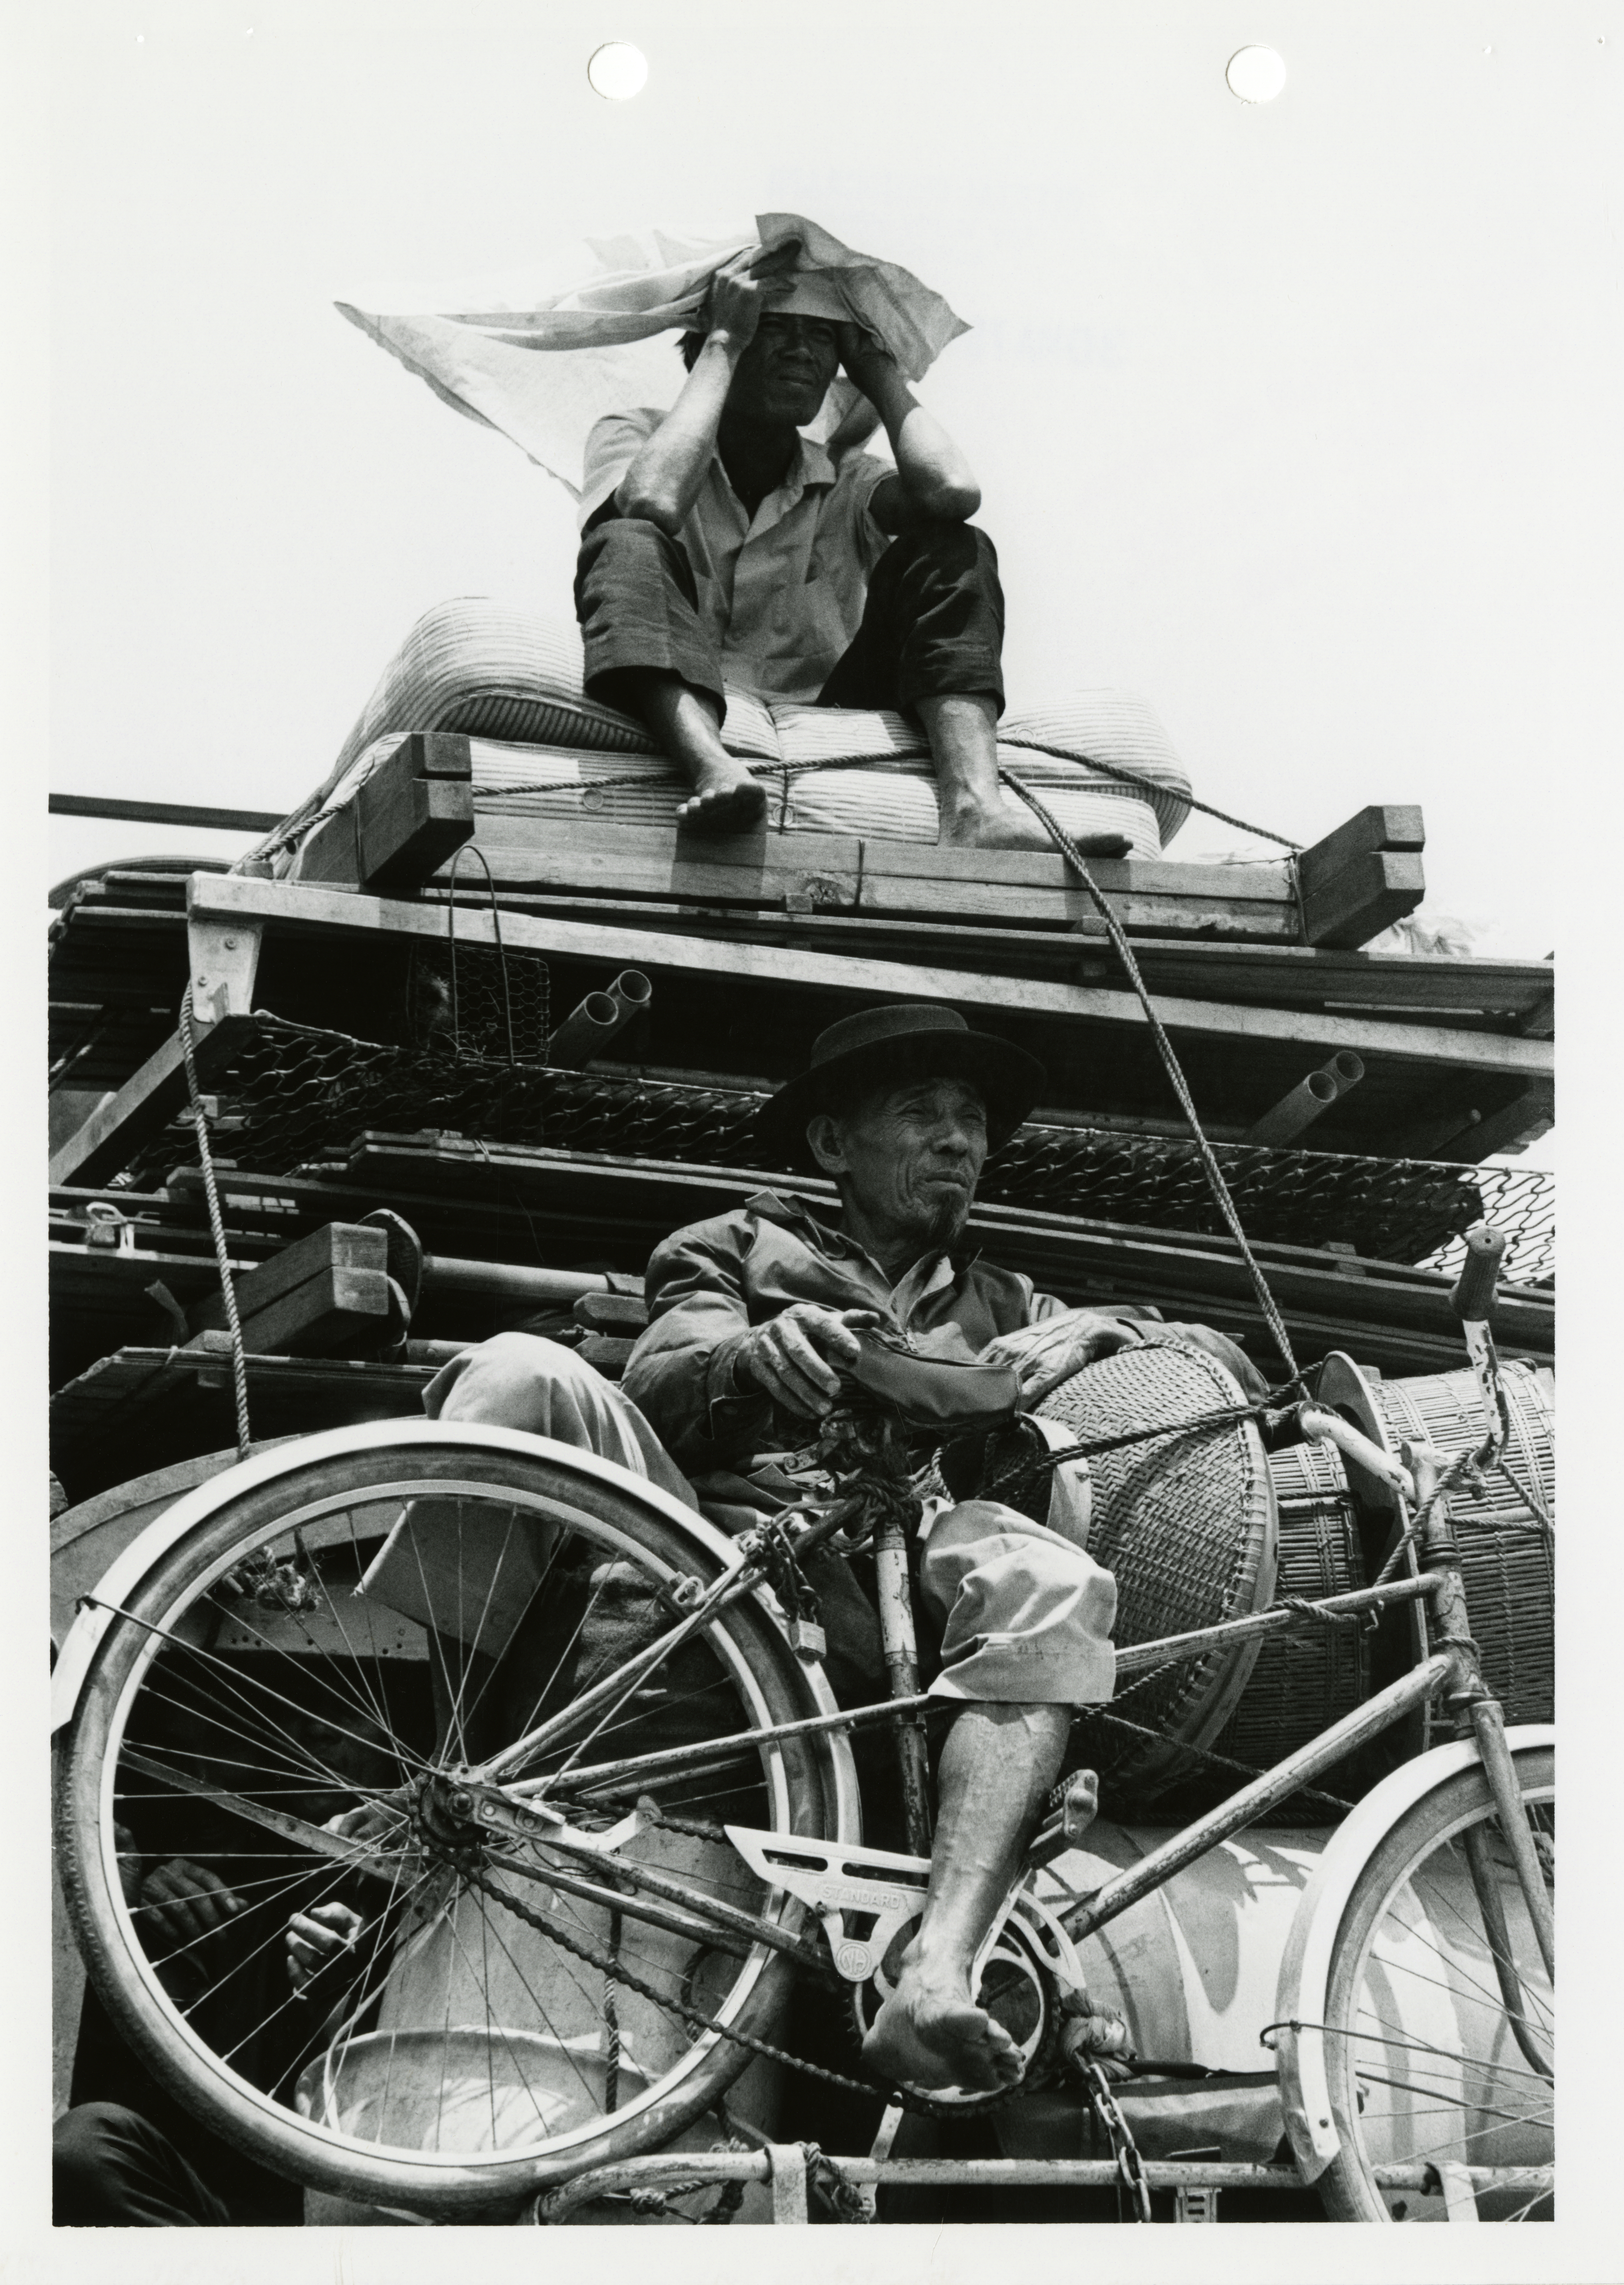 Refugees ride on the back of a truck between Cam Rahn Bay and Nha Trang, South Vietnam. March 30, 1975.